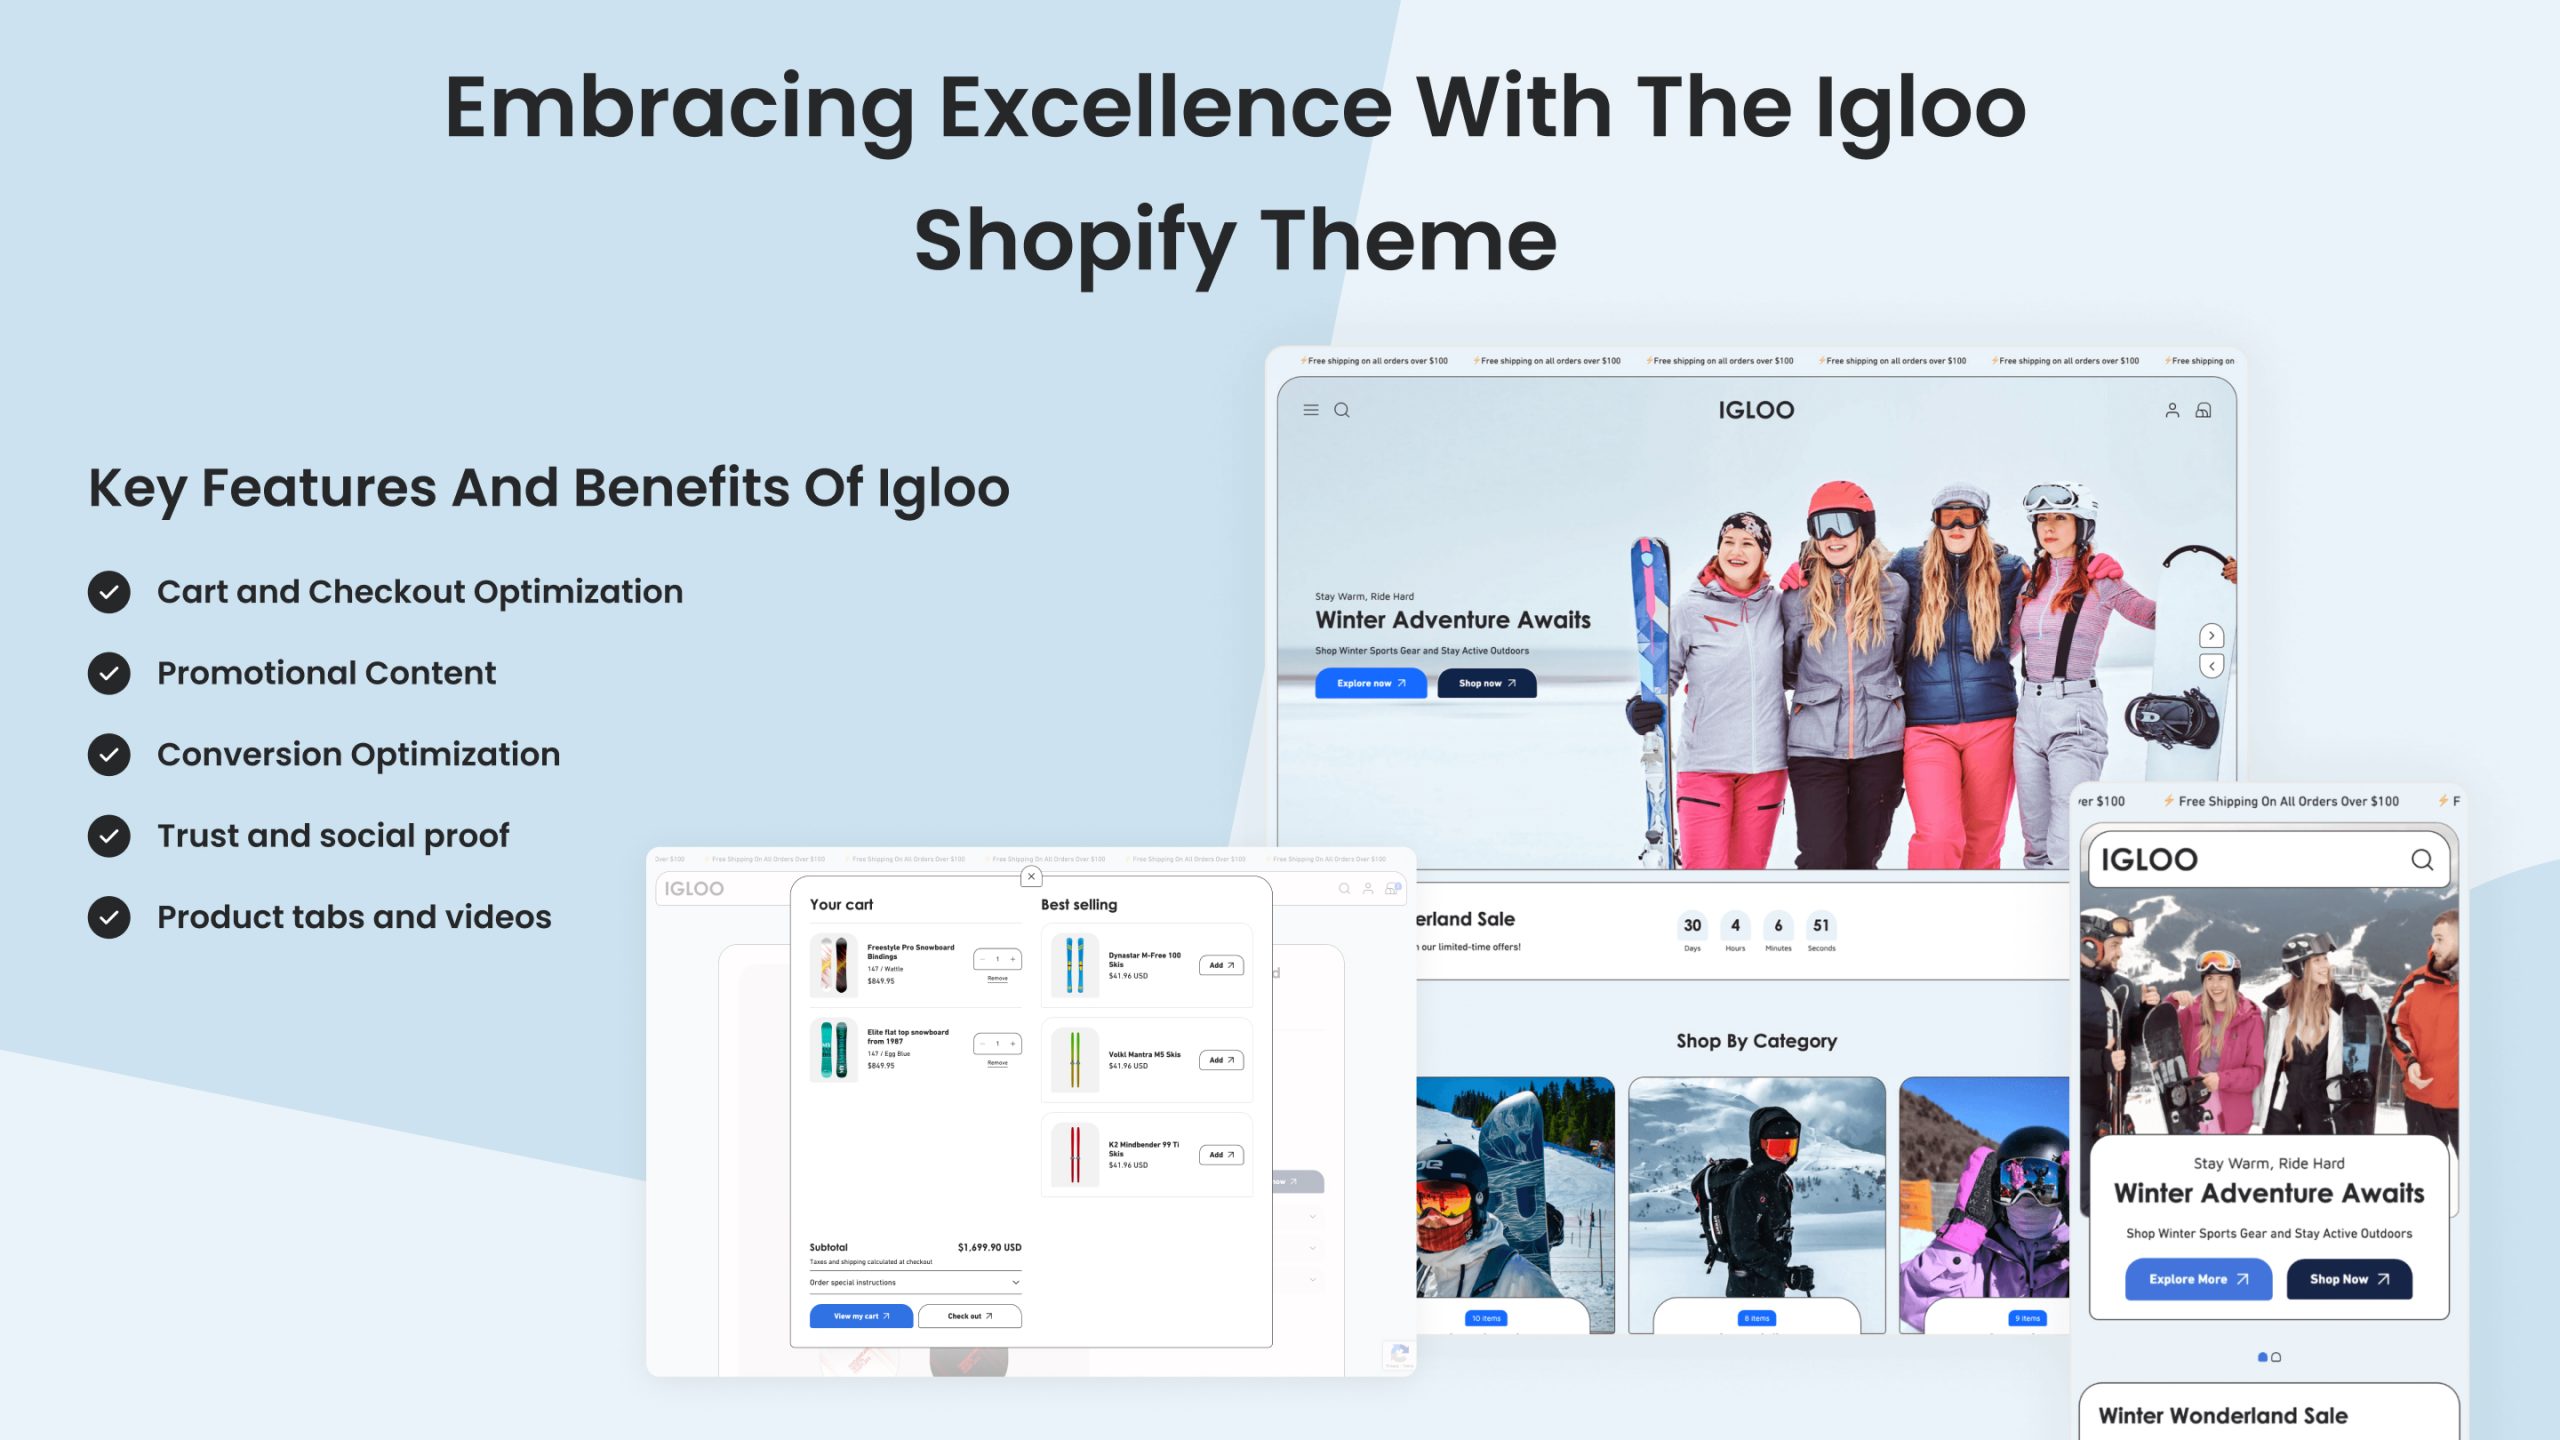 Igloo: The Best-Selling Shopify Theme for eCommerce Stores